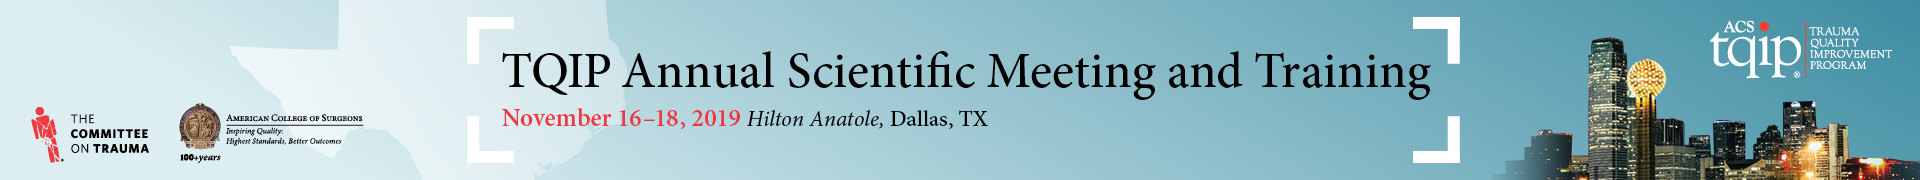 2019 TQIP Annual Scientific Meeting and Training Event Banner